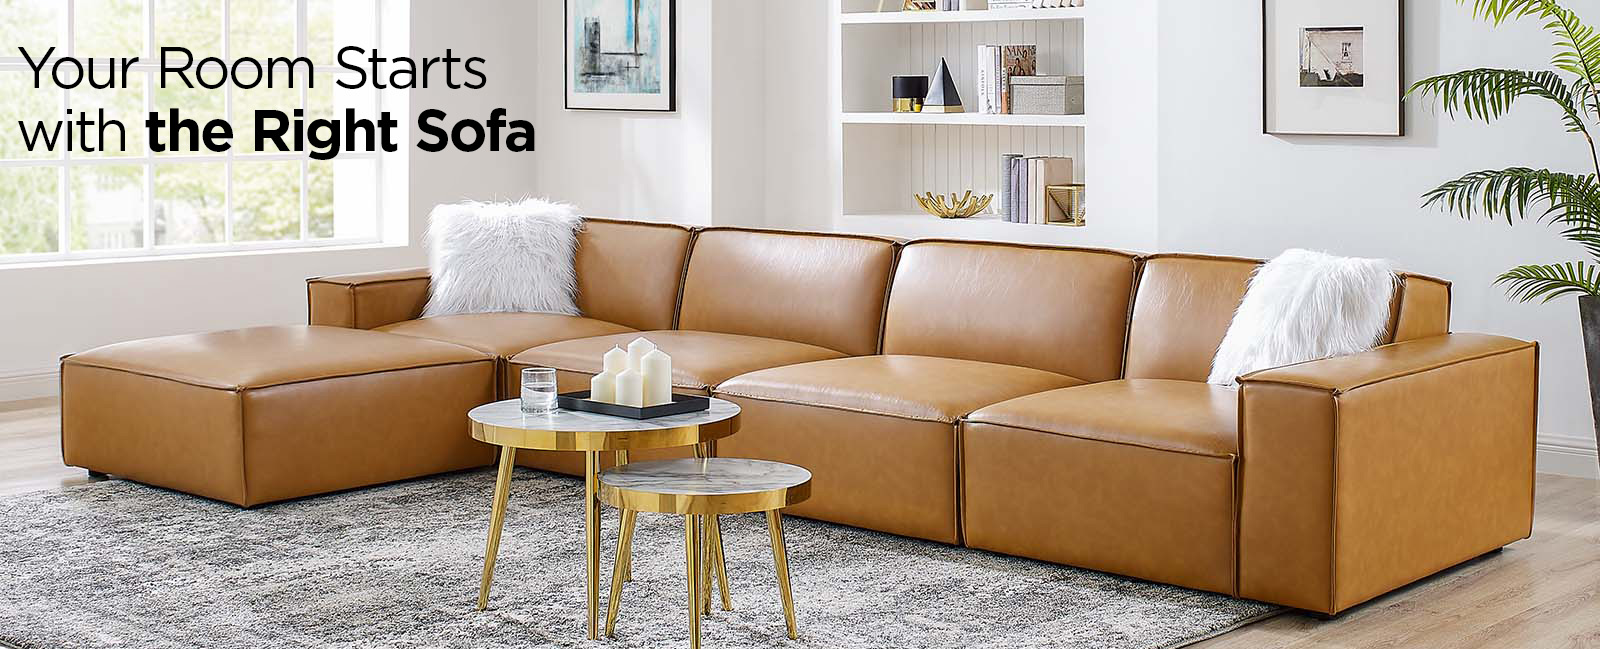 Save on Sofas and Sectionals at Homethreads